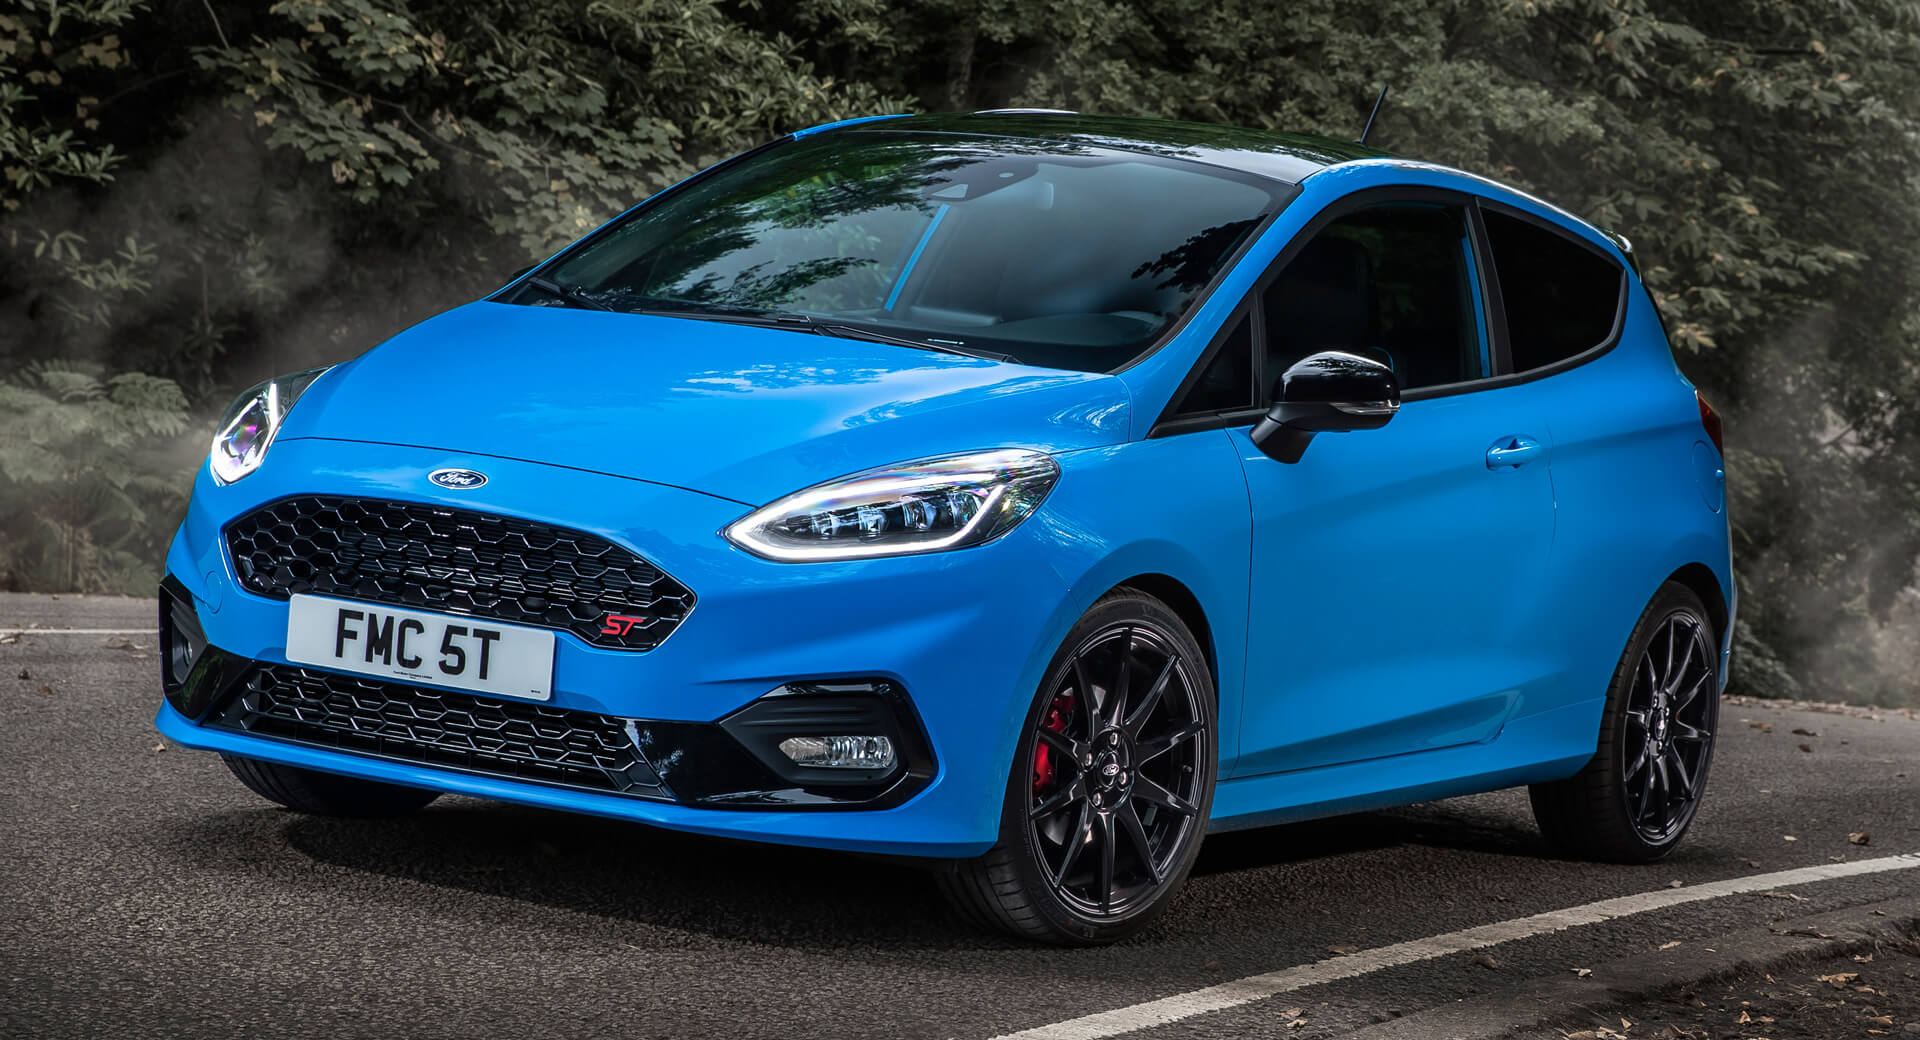 36 Awesome Fiesta st exterior Trend in This Years